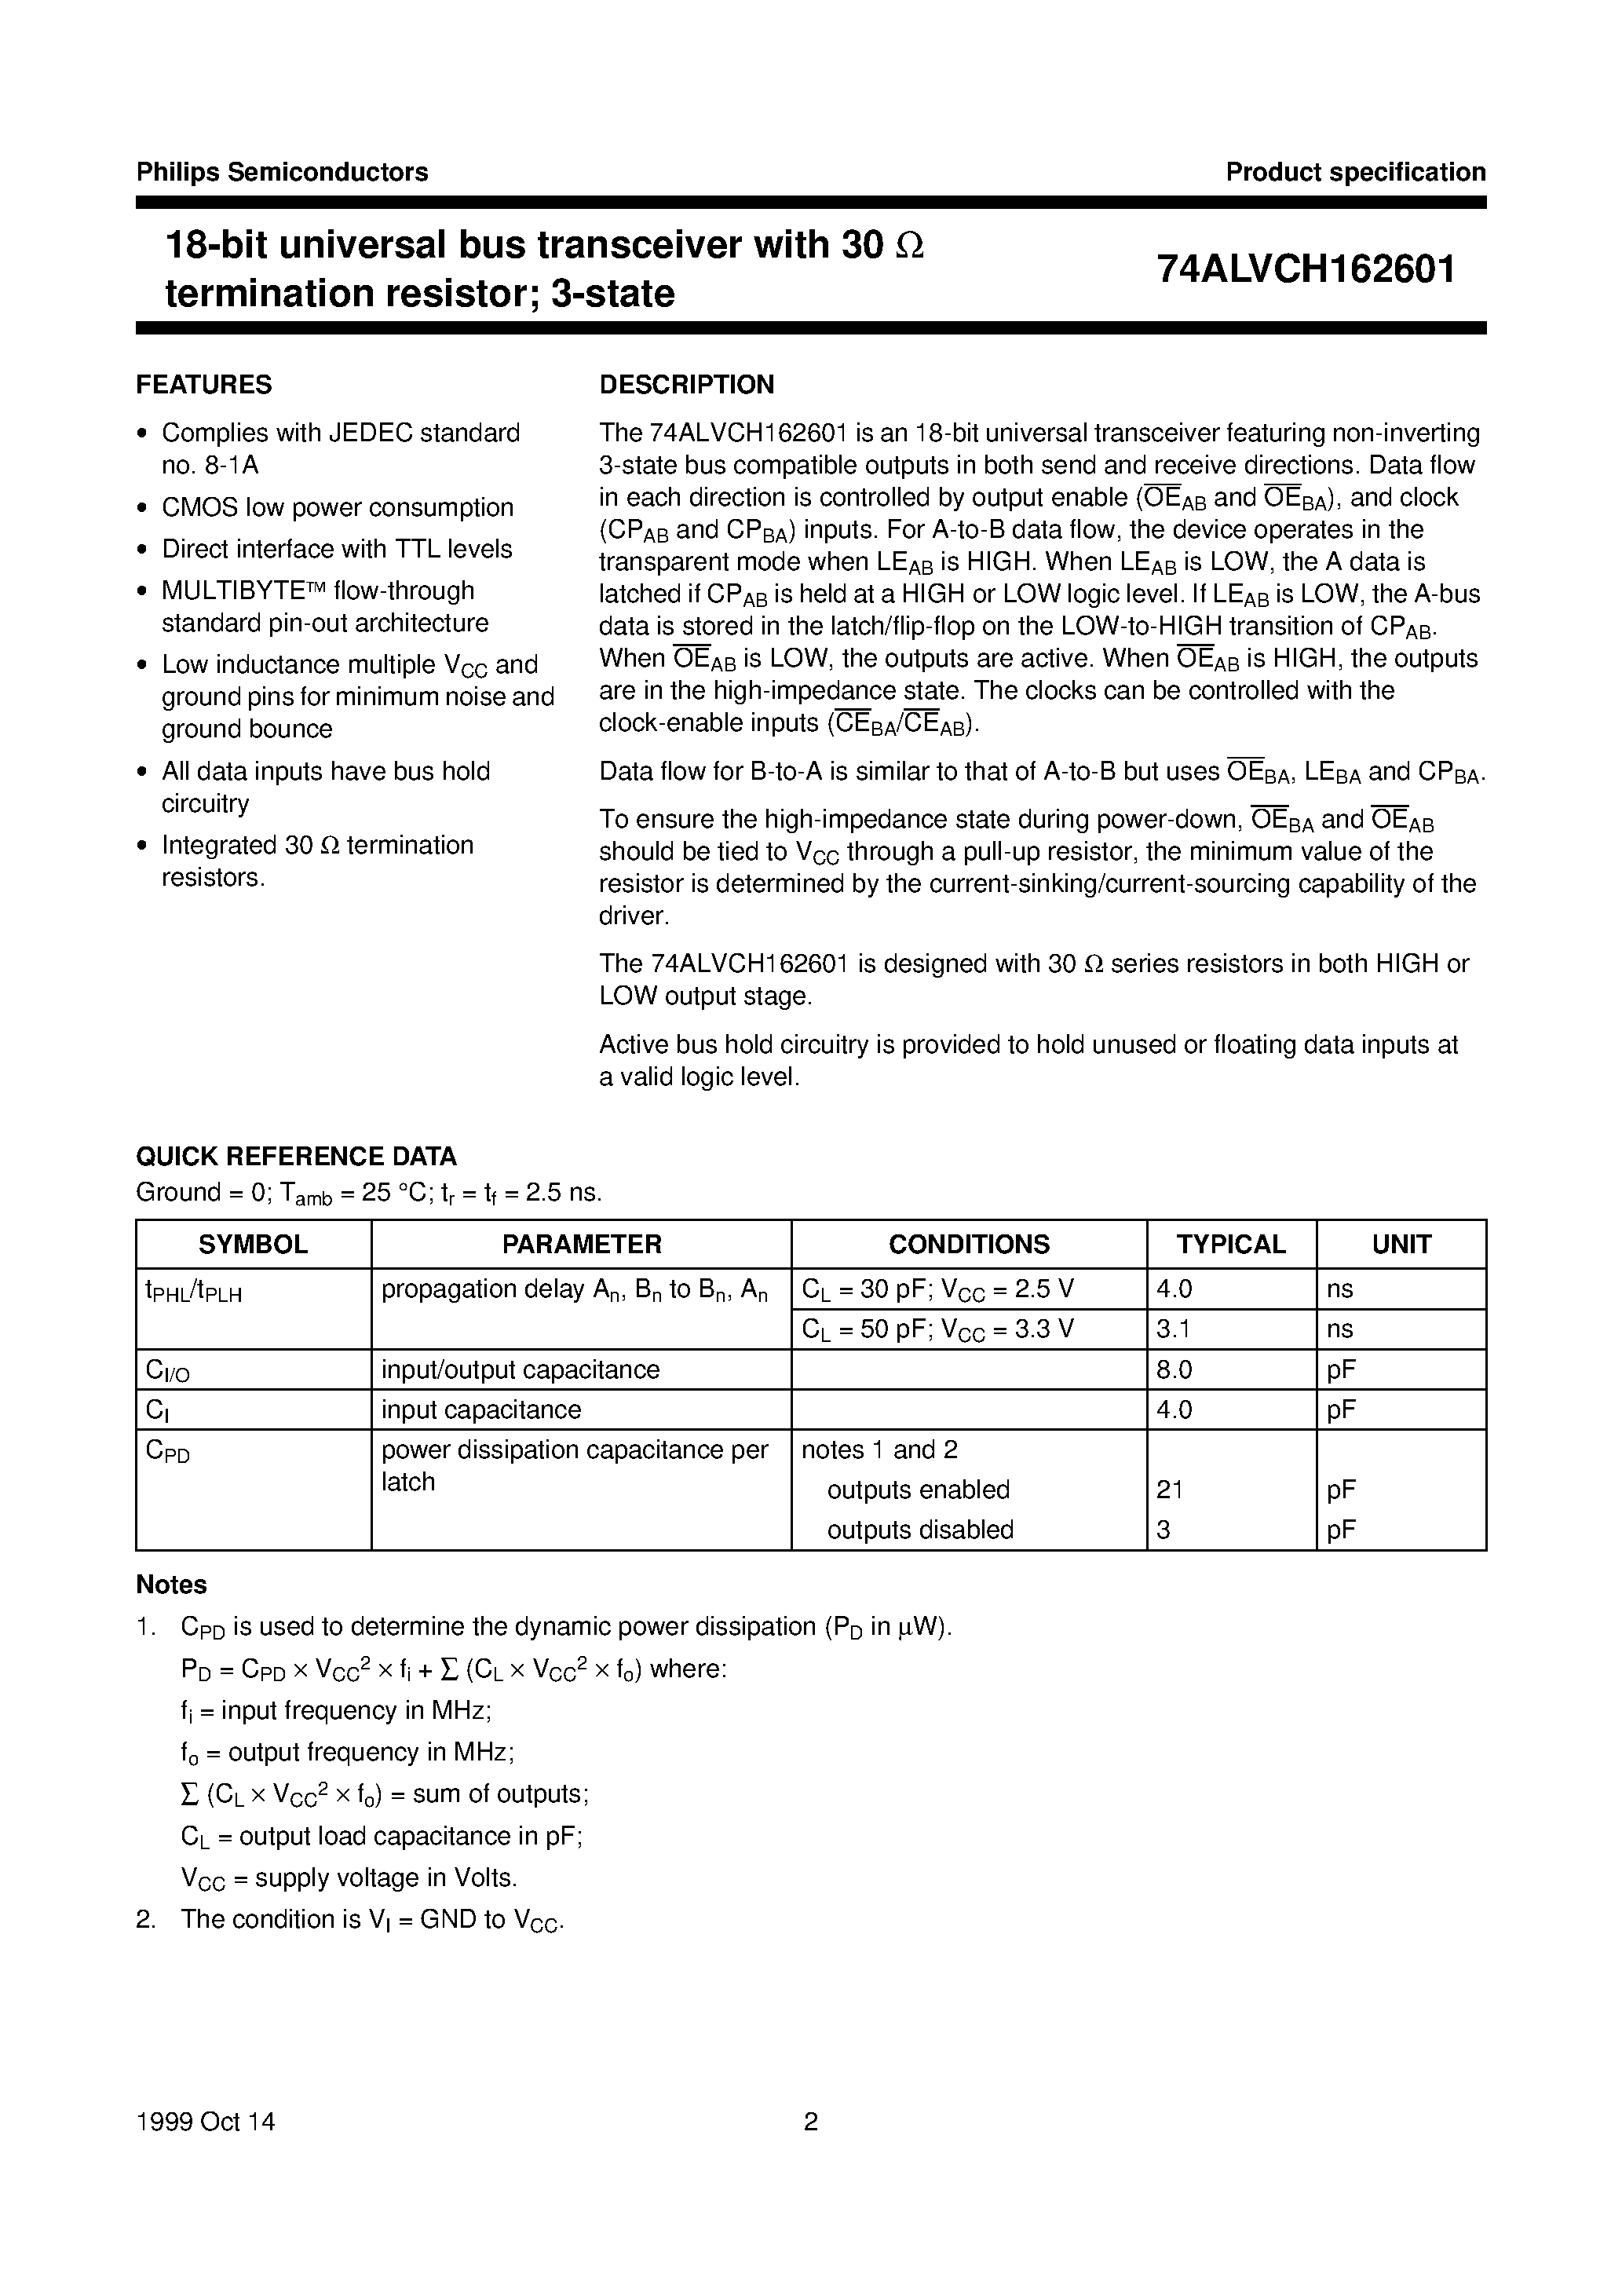 Datasheet 74ALVCH162601DGG - 18-bit universal bus transceiver with 30 ohm termination resistor; 3-state page 2